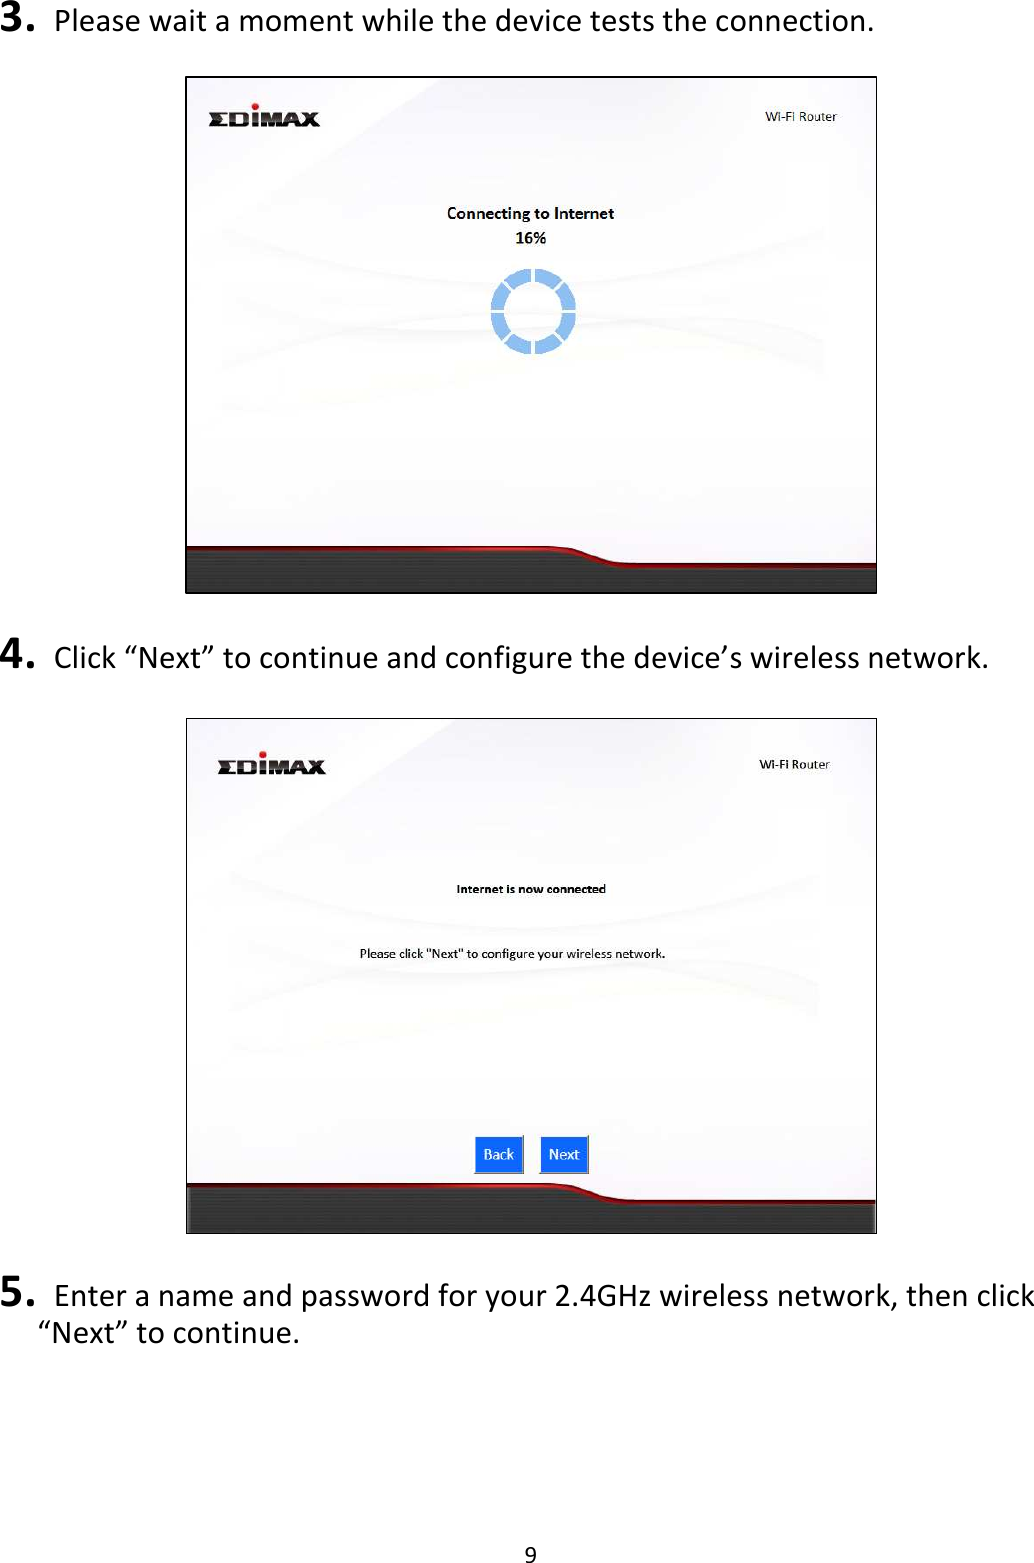 9  3.   Please wait a moment while the device tests the connection.                 4.   Click “Next” to continue and configure the device’s wireless network.    5.   Enter a name and password for your 2.4GHz wireless network, then click “Next” to continue.  